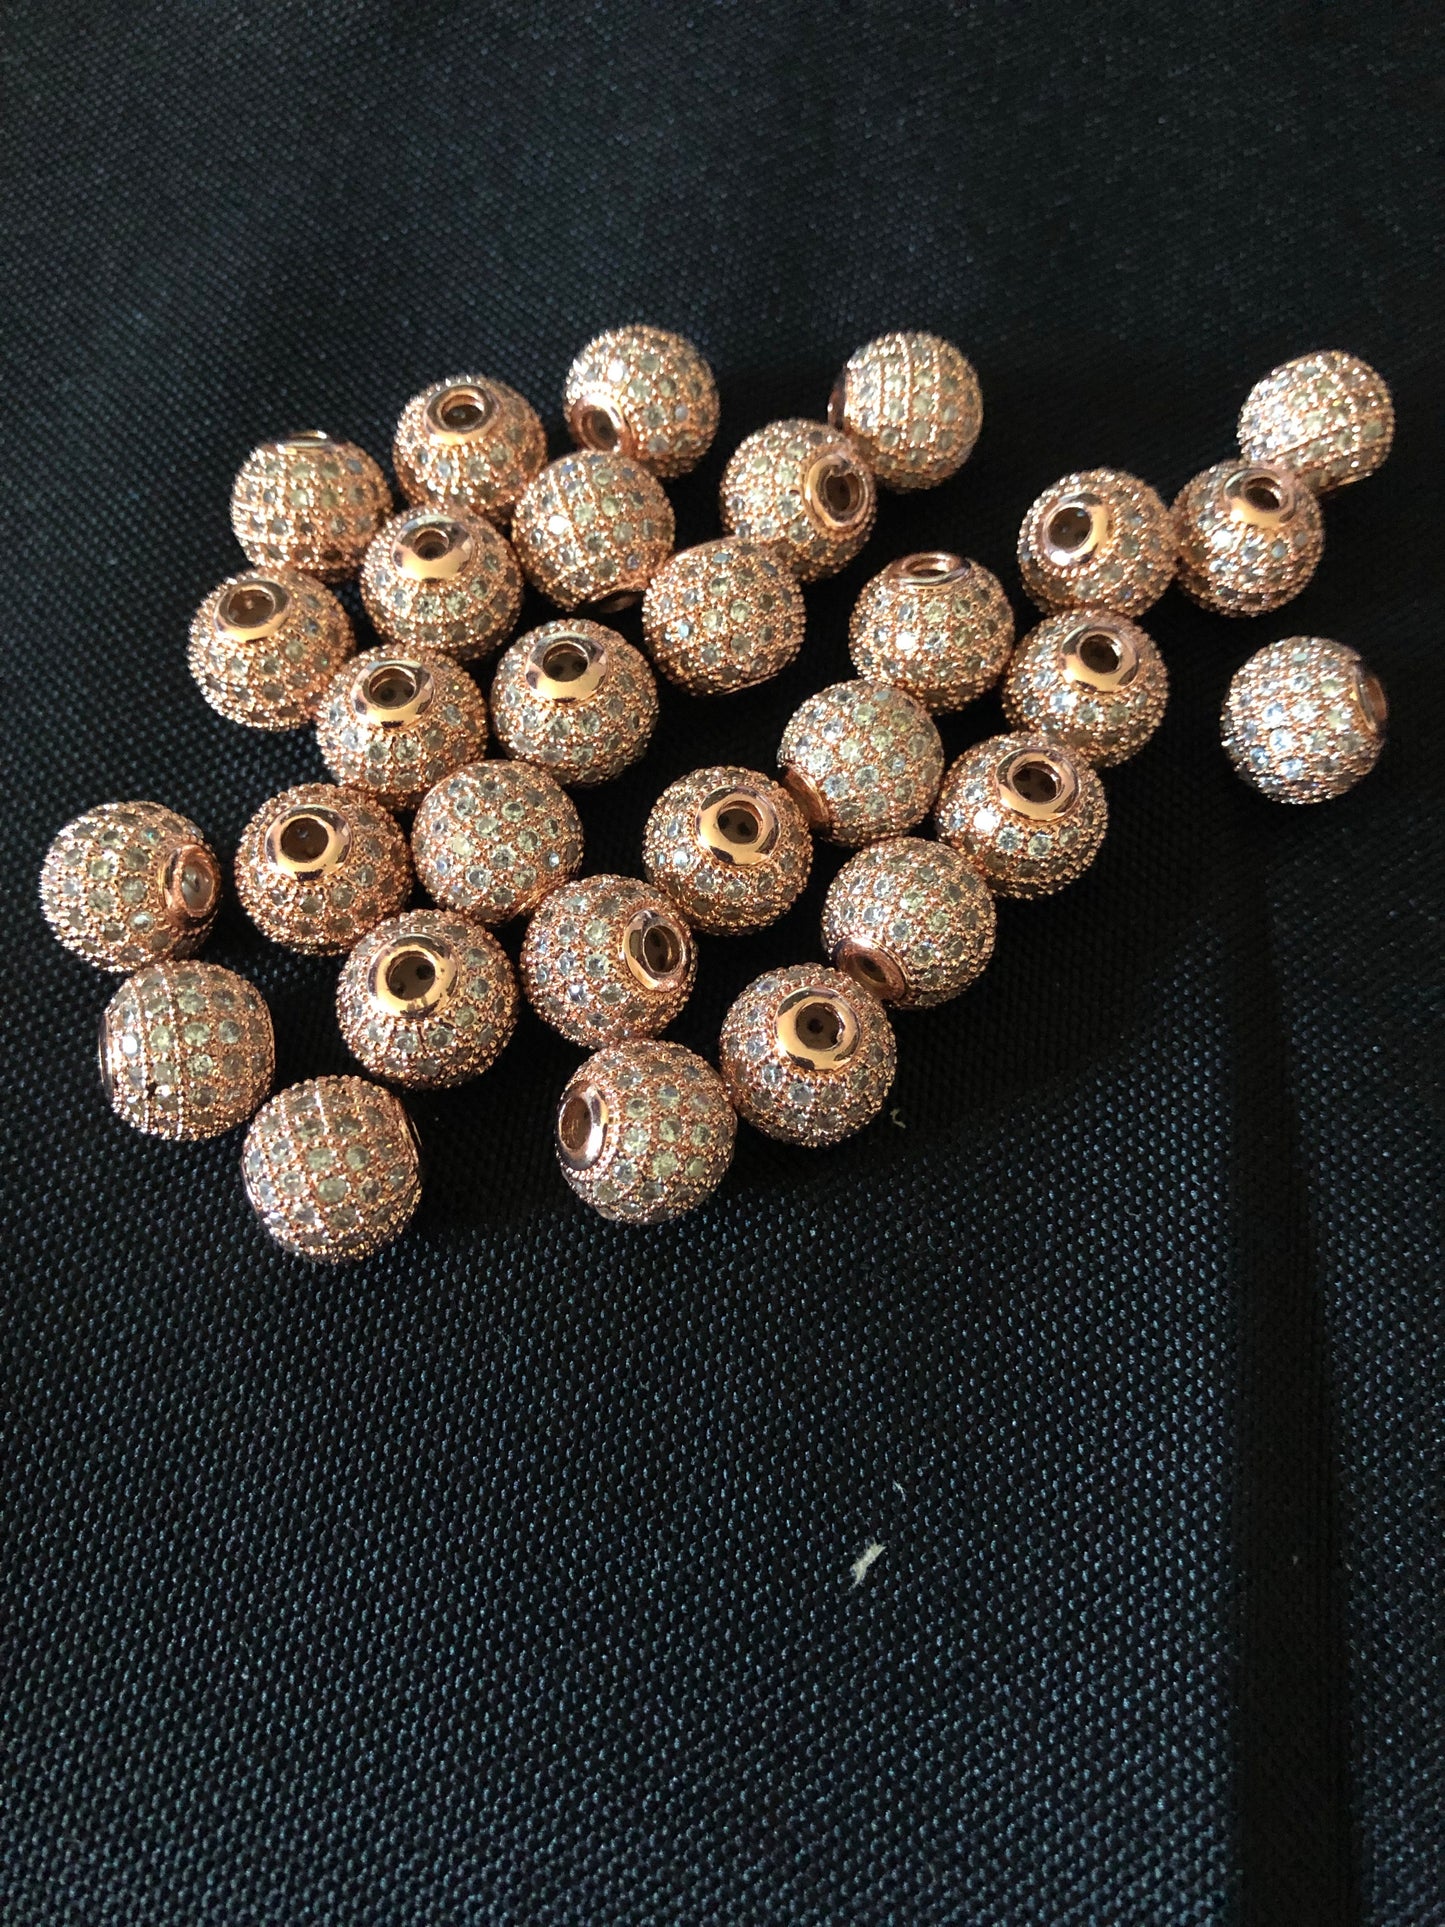 CZ Pave Spacer Beads -10mm